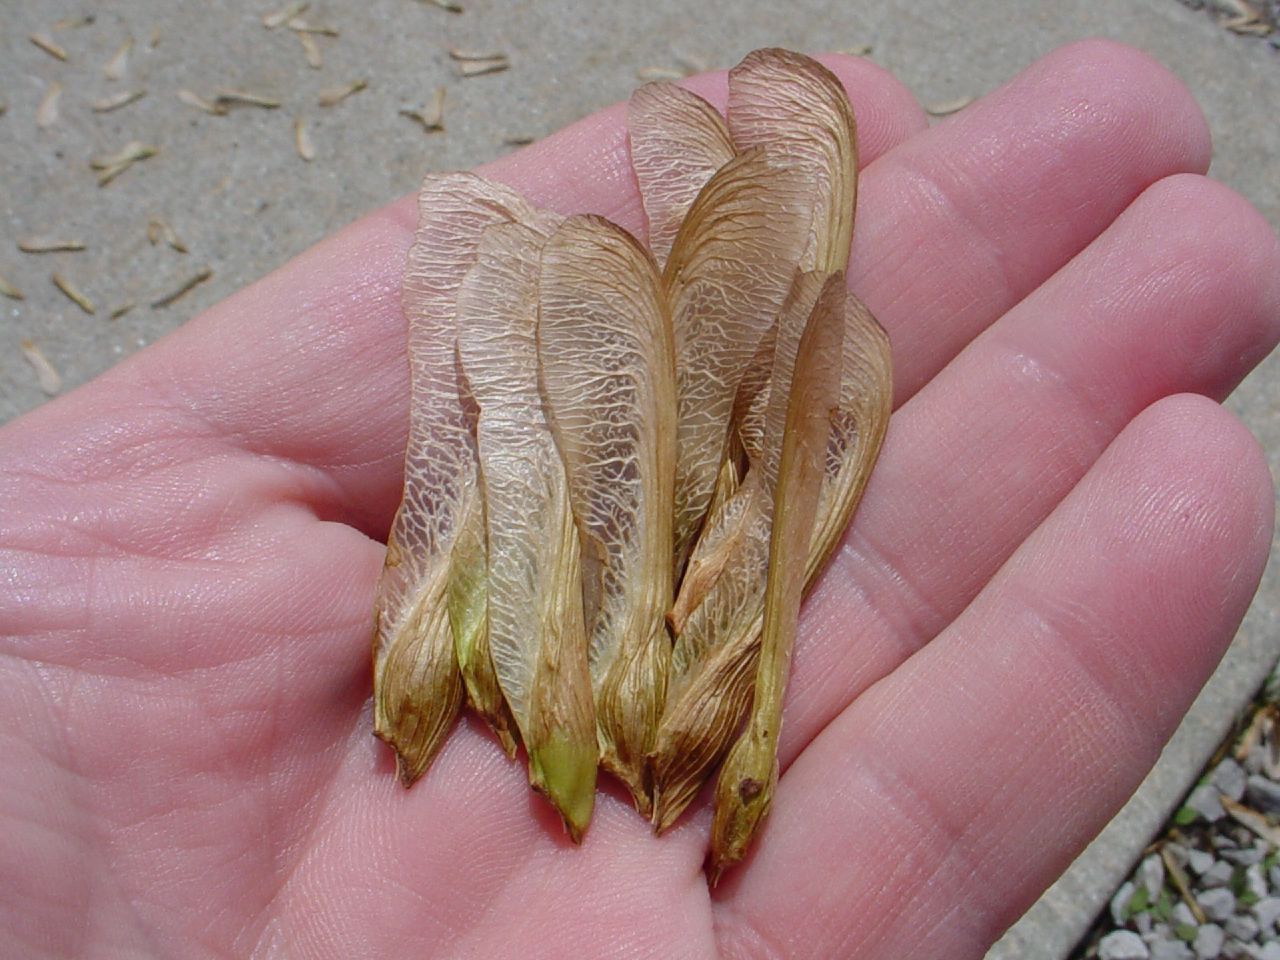 Maple Seeds in an open hand | Counselman Collection  -  Foter  -  CC BY-SA